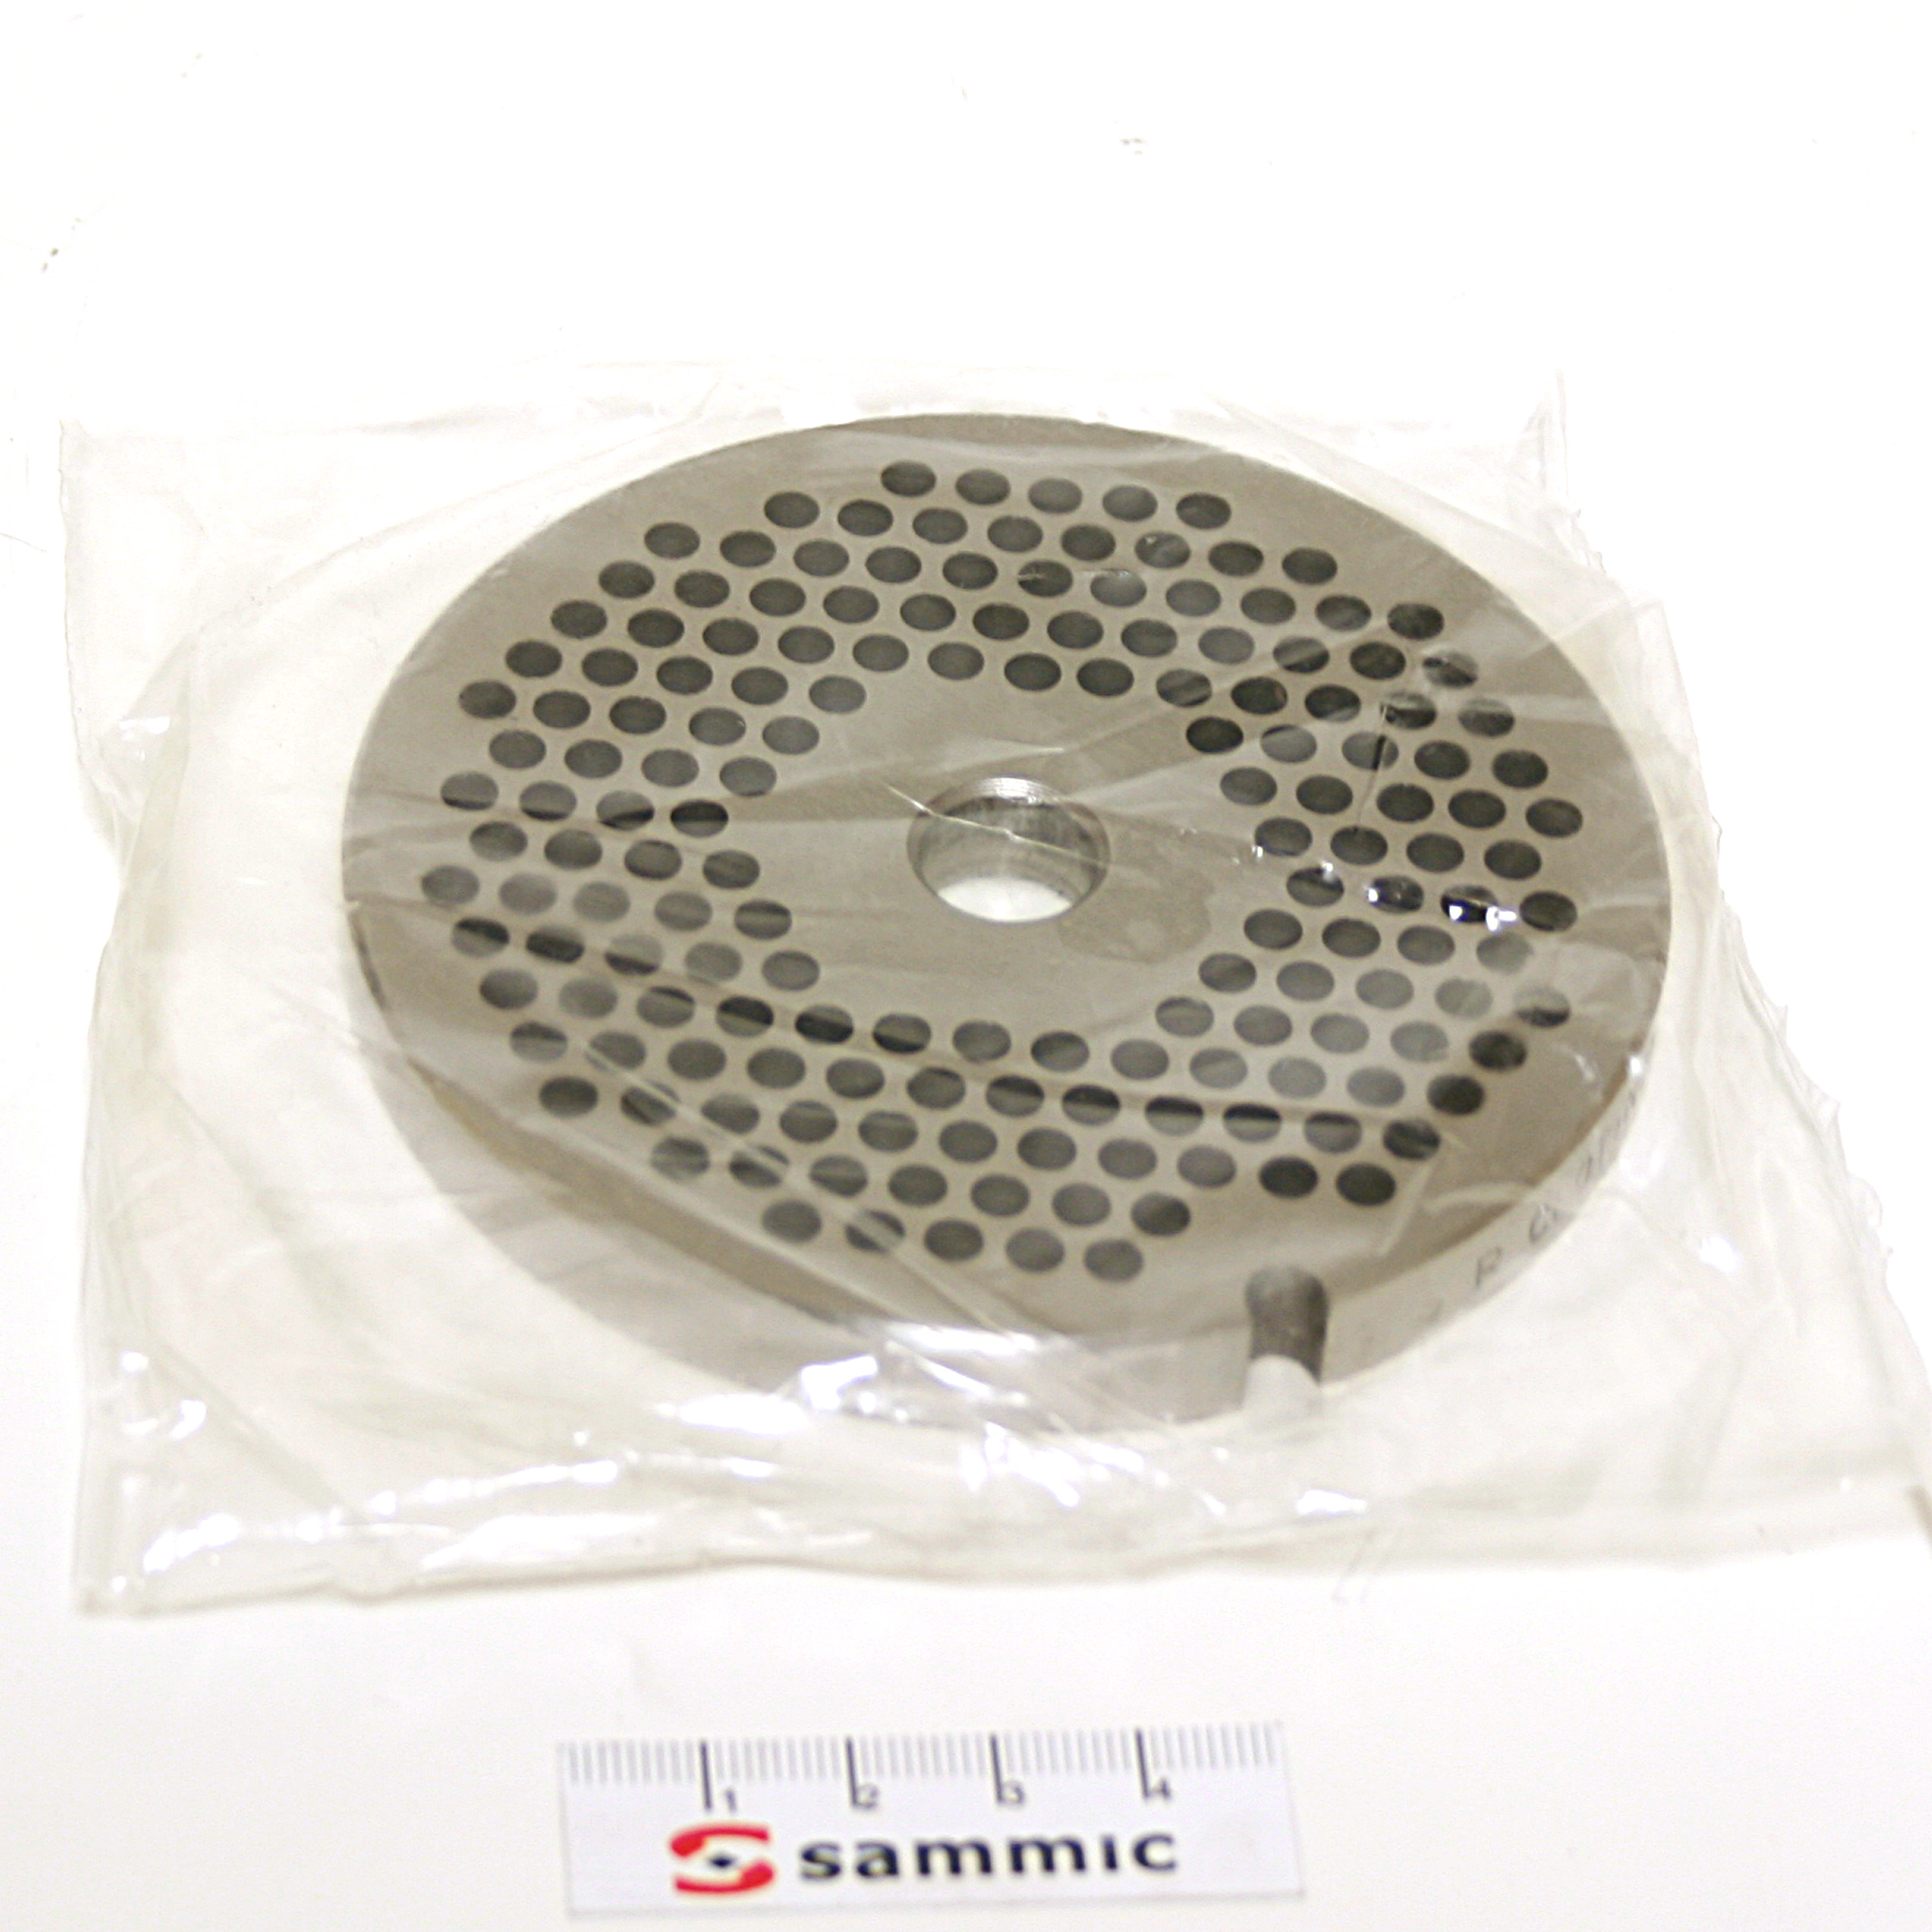 Sammic 4.5MM Mesh Plate for Sammic PS-32 & PS-32R